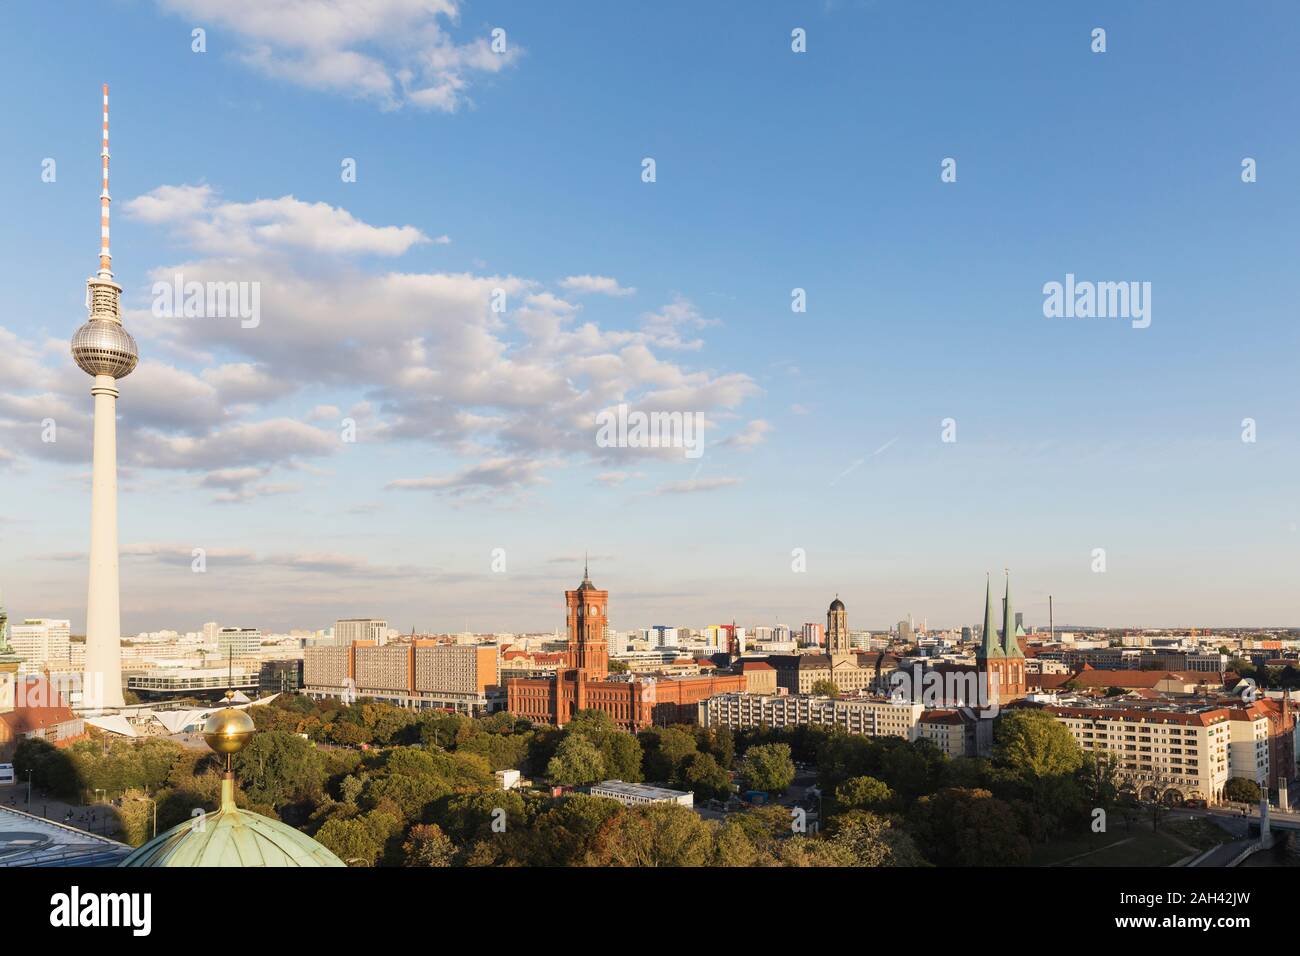 Germany, Berlin, Sky over Berlin TV Tower and surrounding city buildings Stock Photo